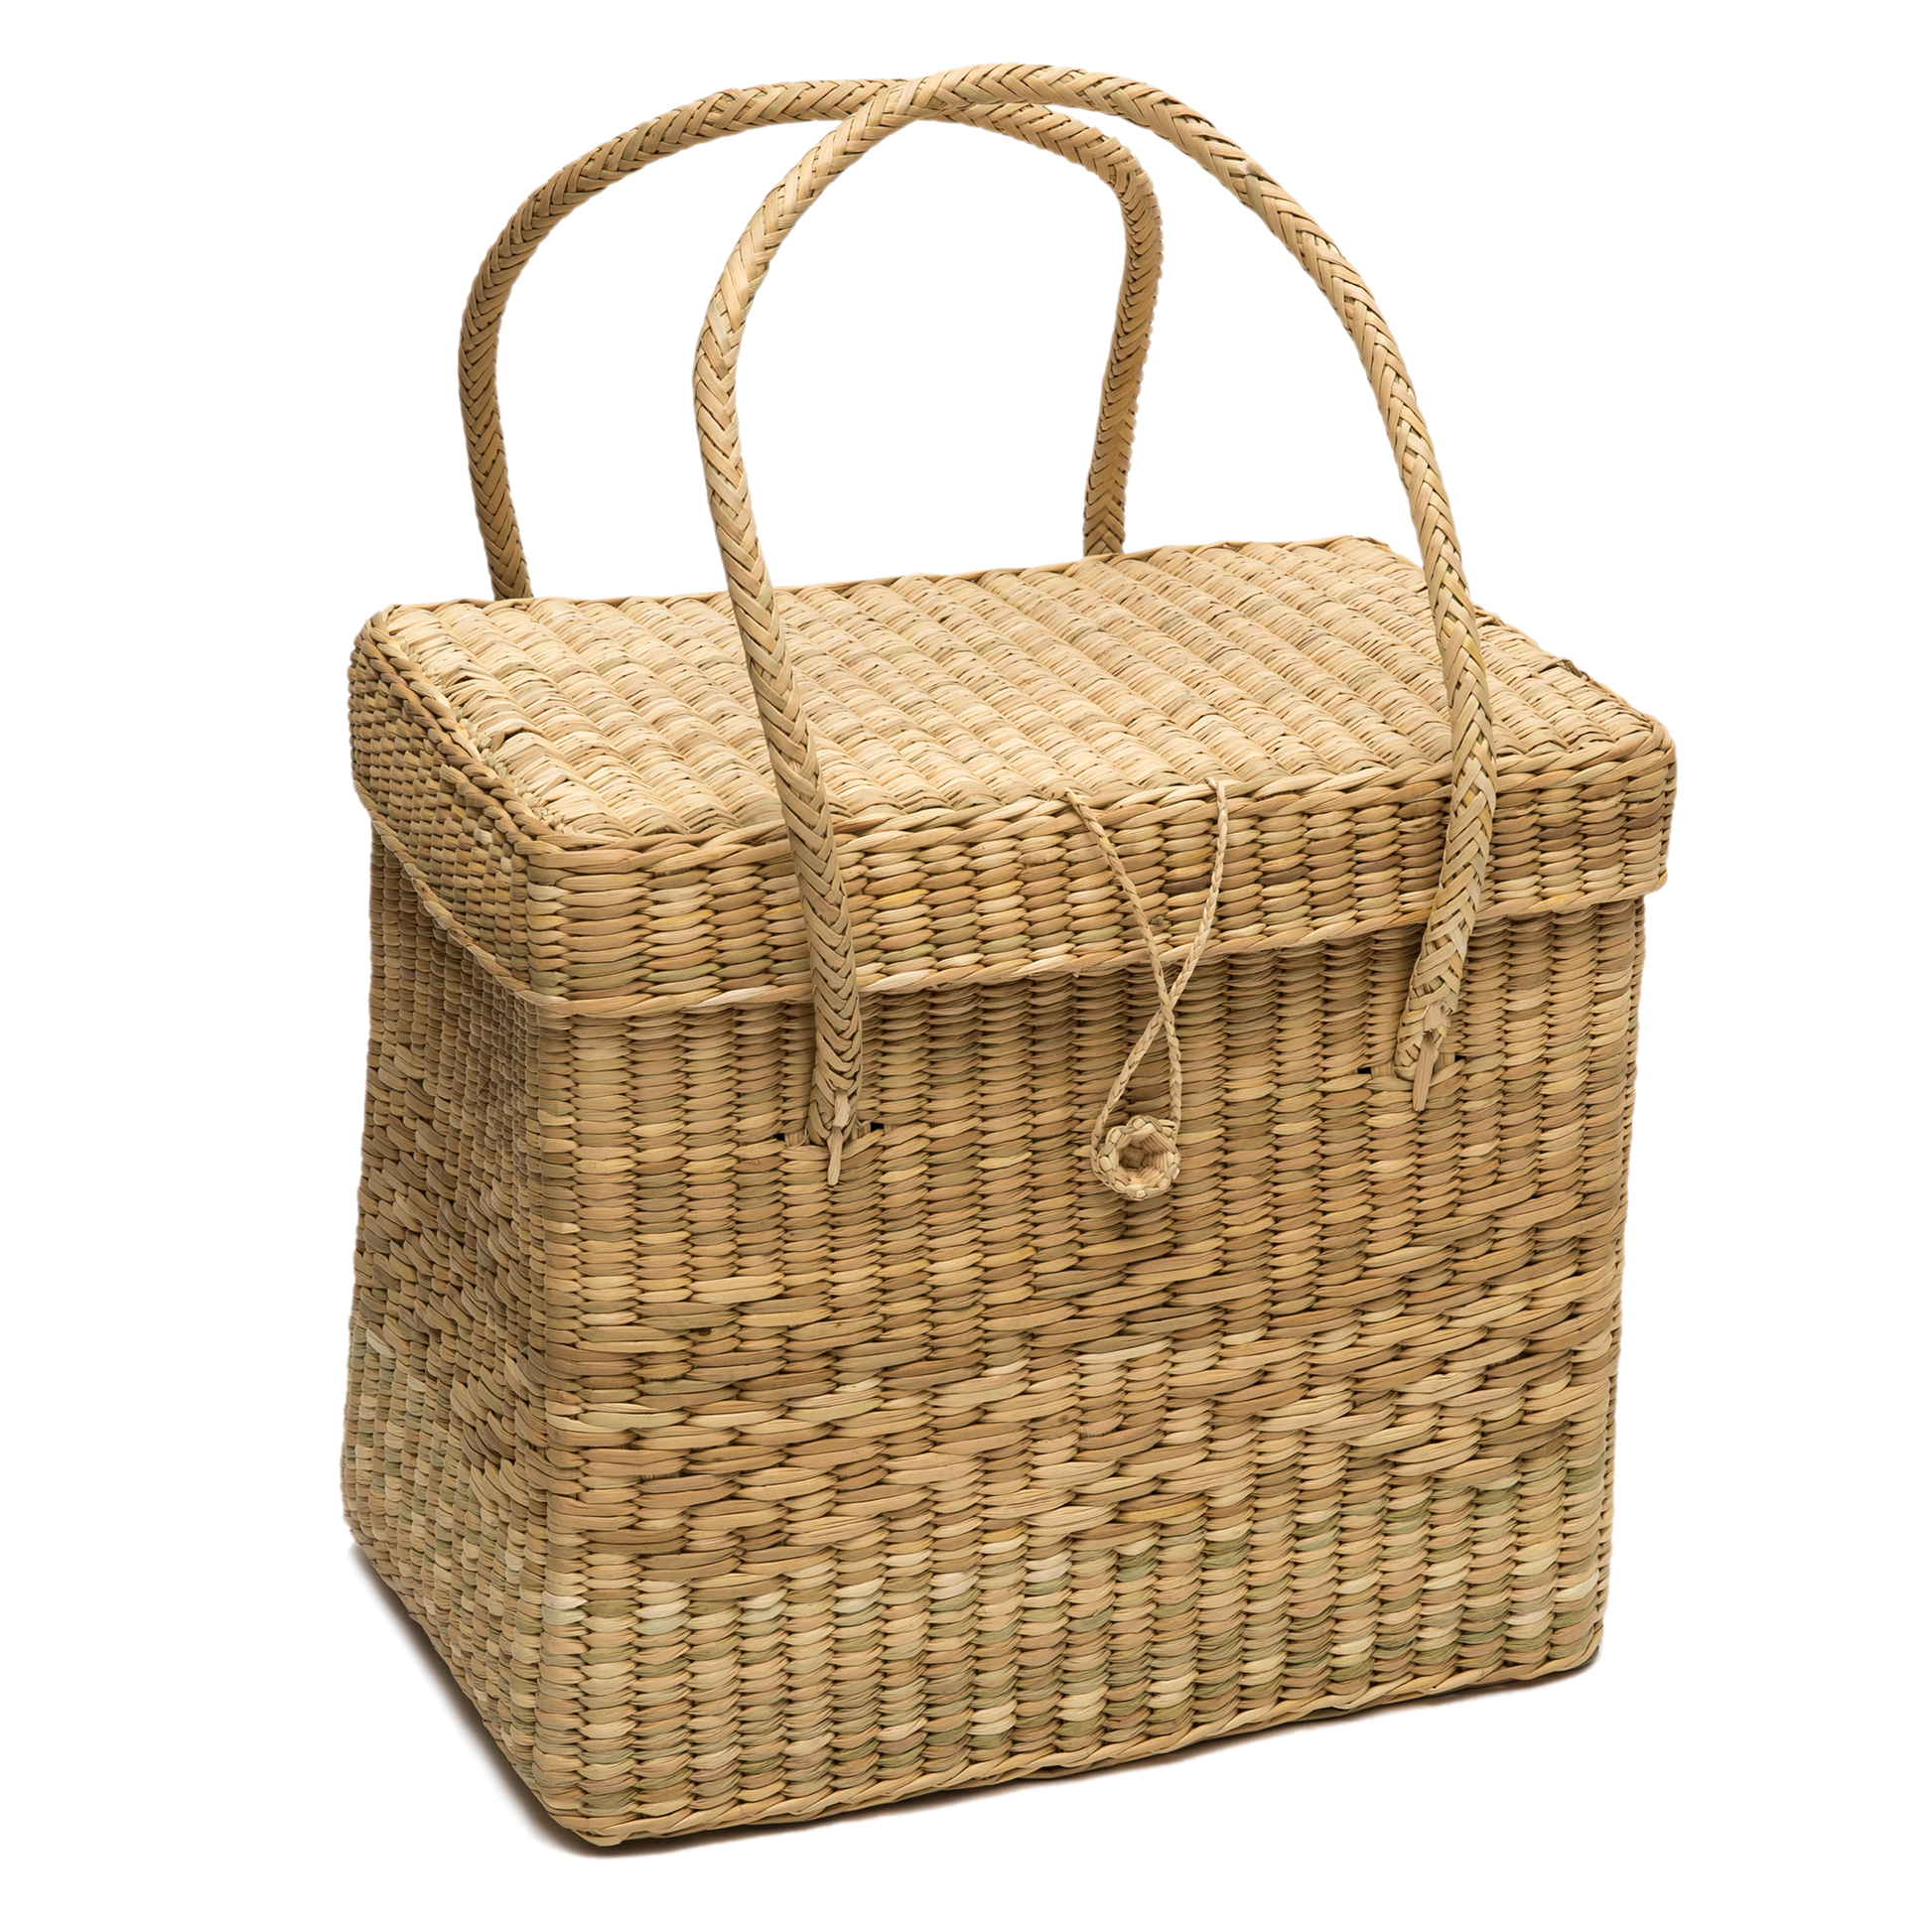 Intiearth straw picnic basket with hot pink motif